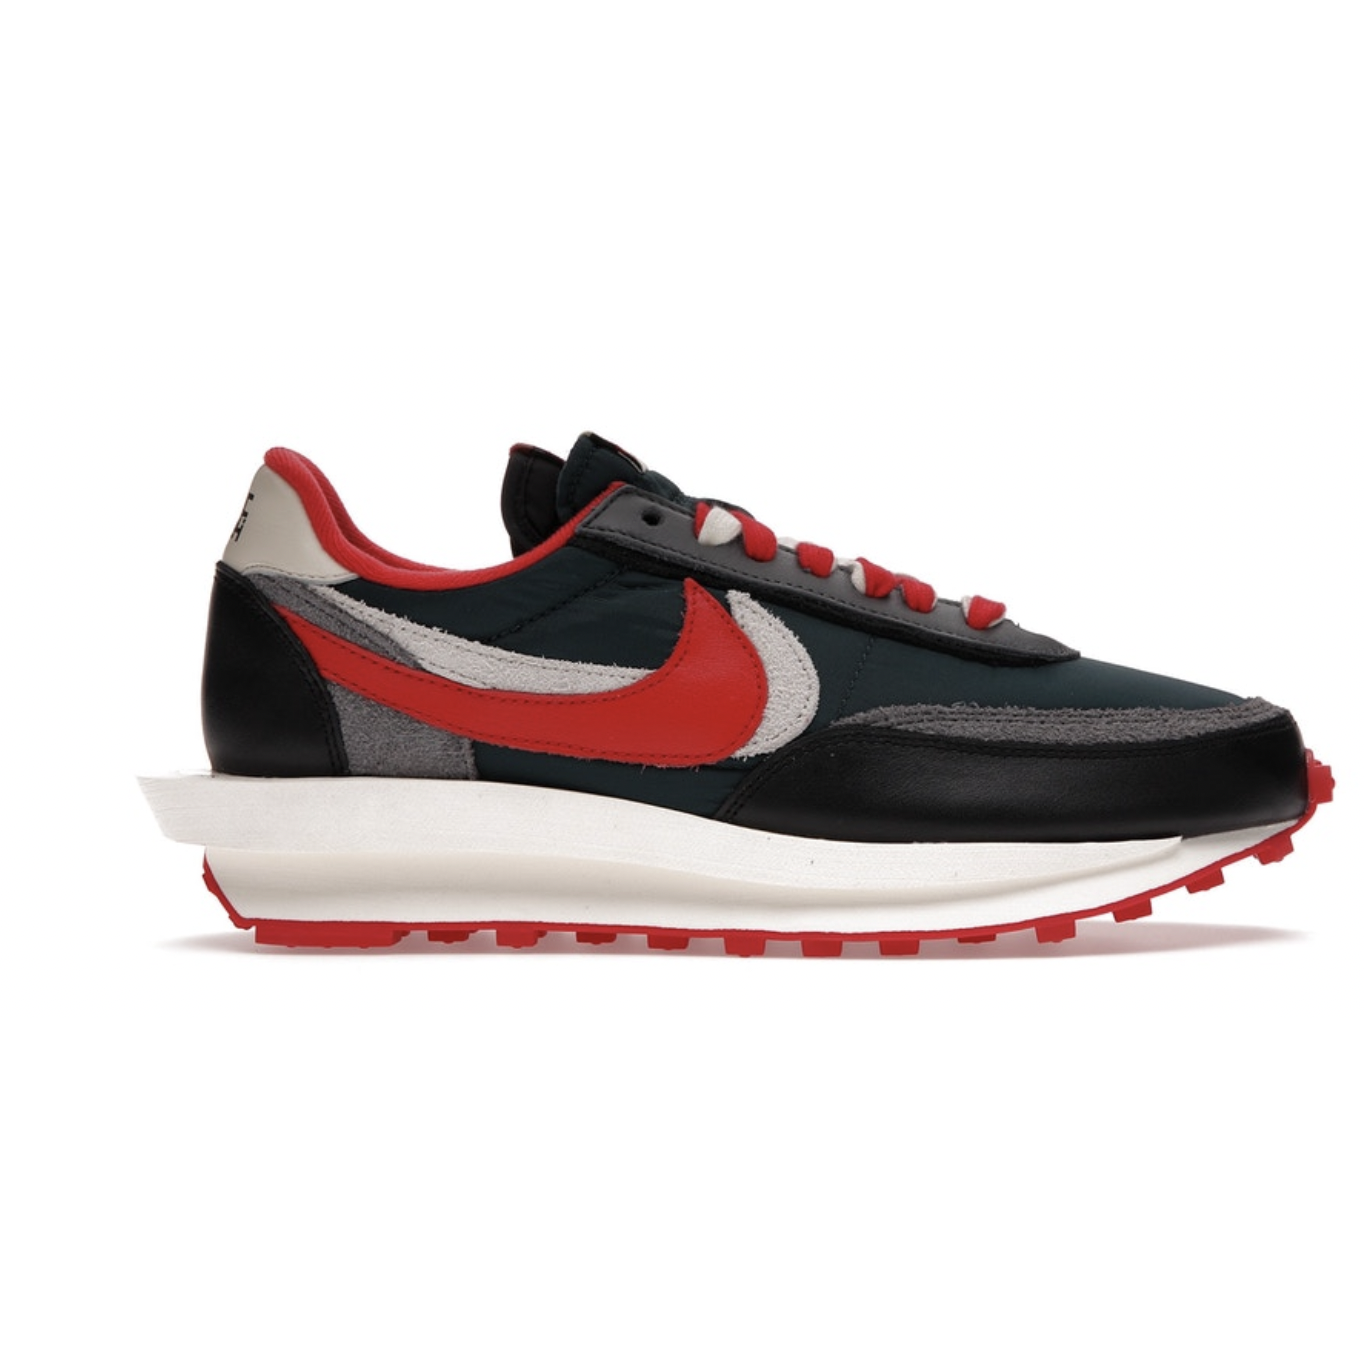 Nike LD Waffle sacai Undercover Midnight Spruce University Red by Nike from £225.00